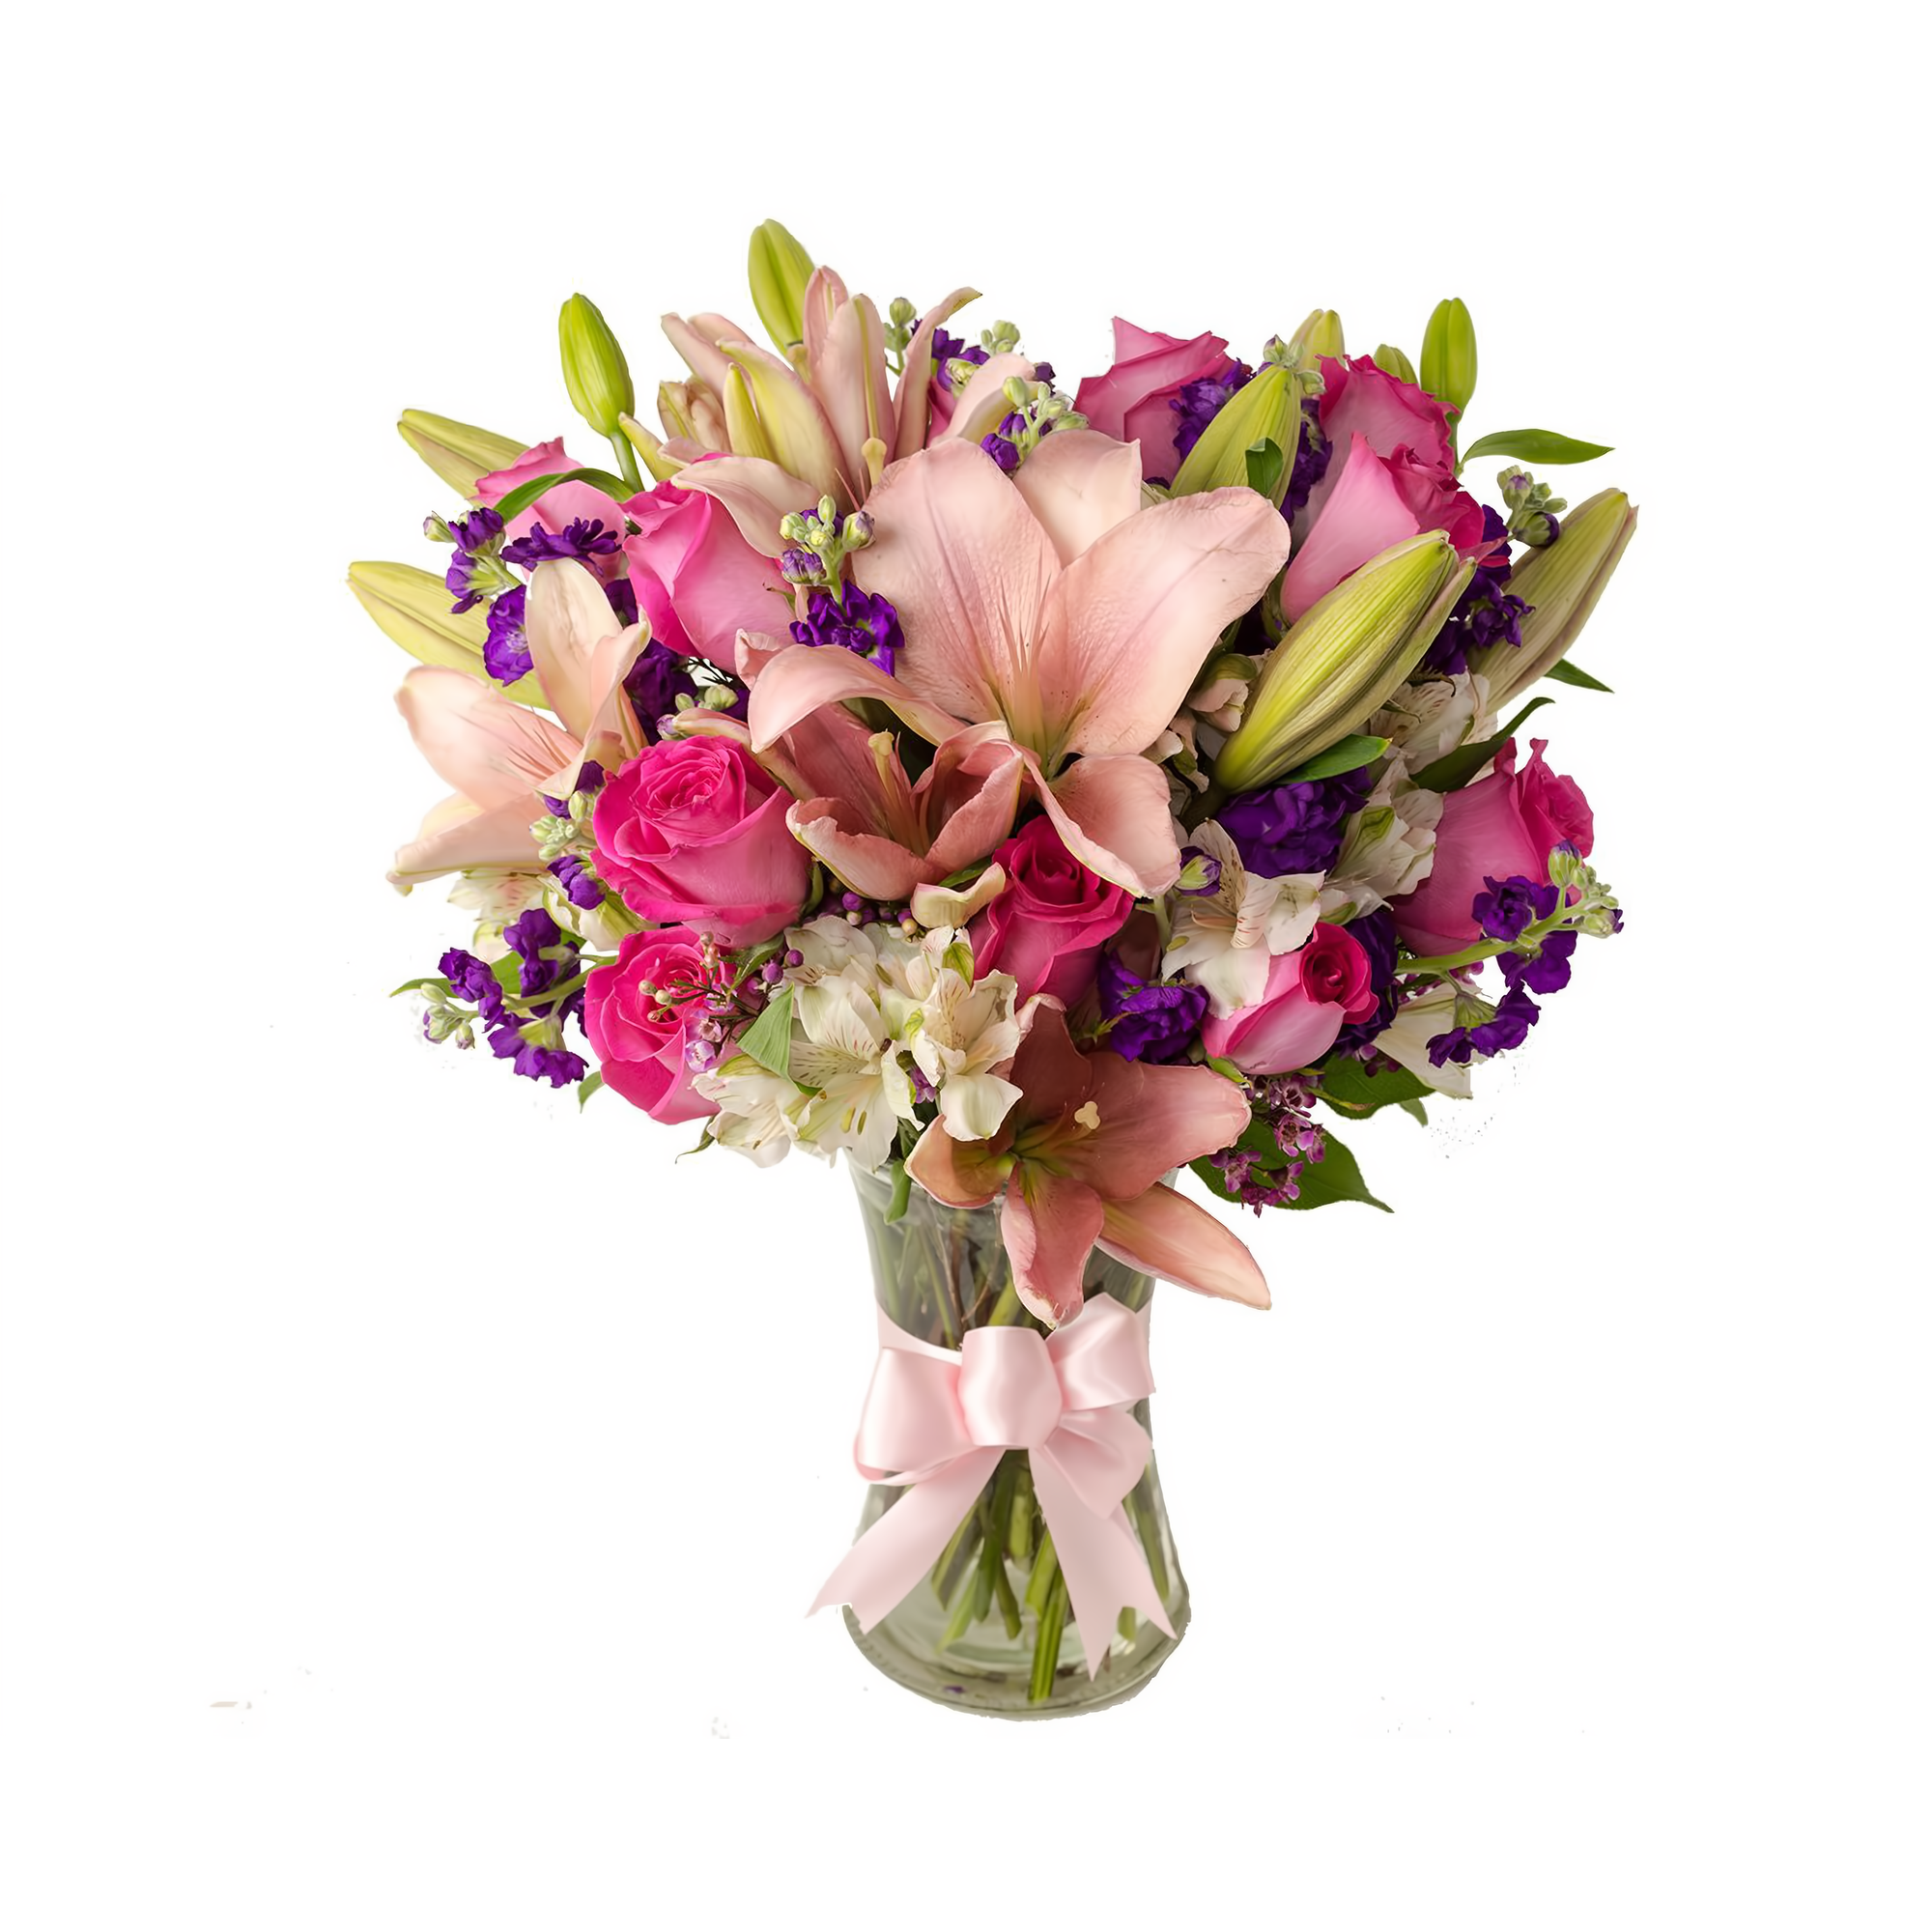 Manhattan Flower Delivery - Sweetheart Lovely - Occasions > Anniversary